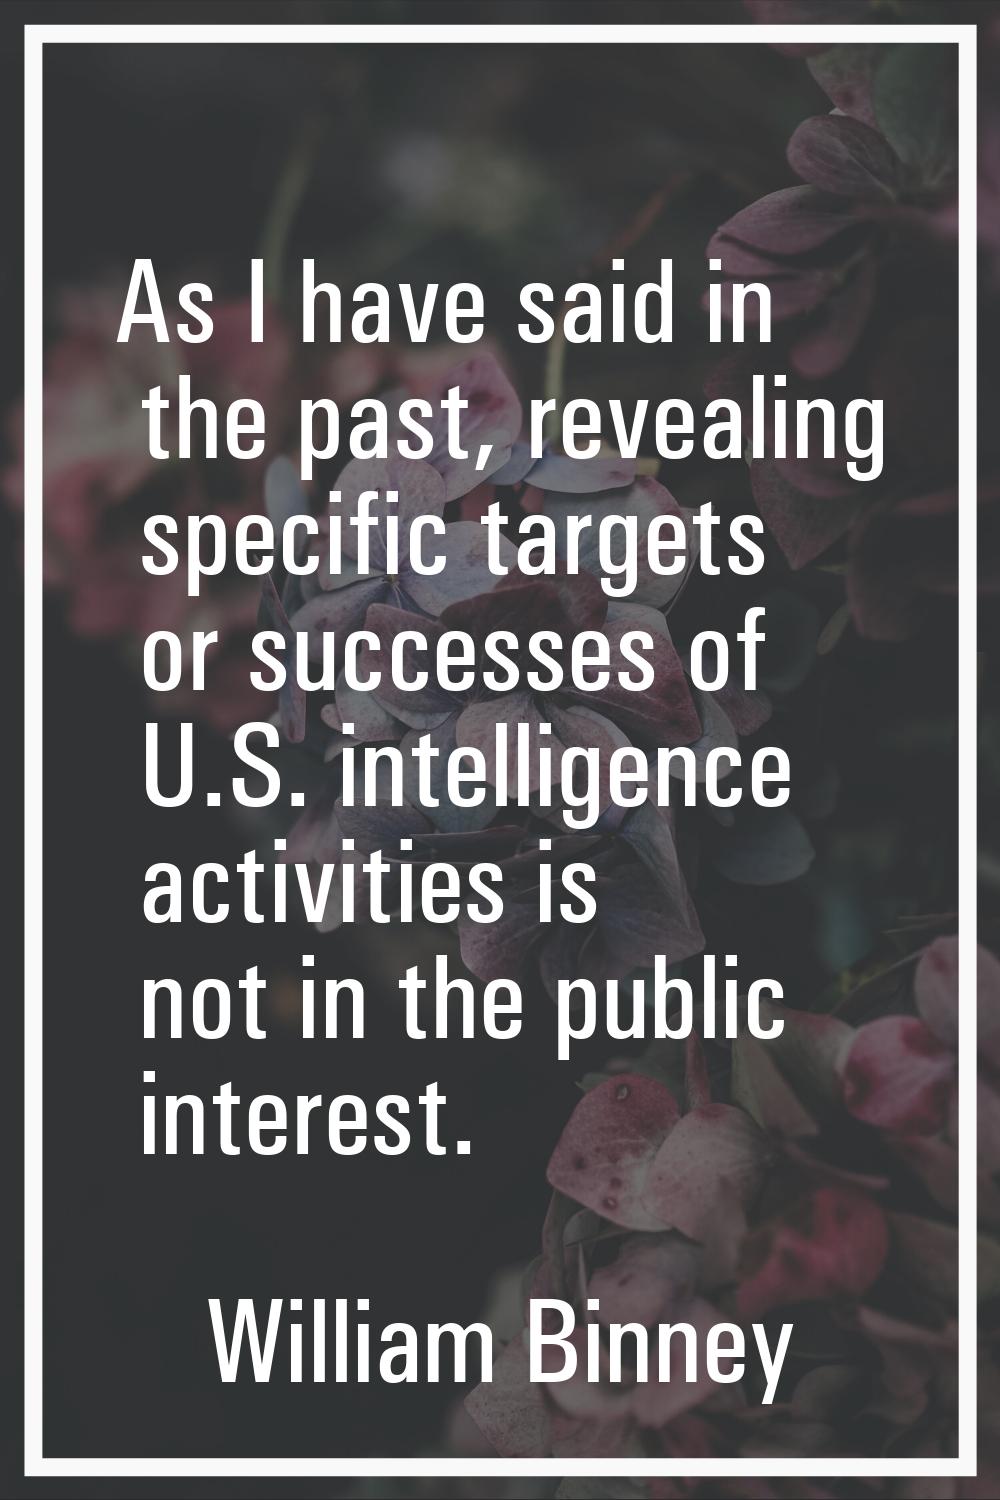 As I have said in the past, revealing specific targets or successes of U.S. intelligence activities